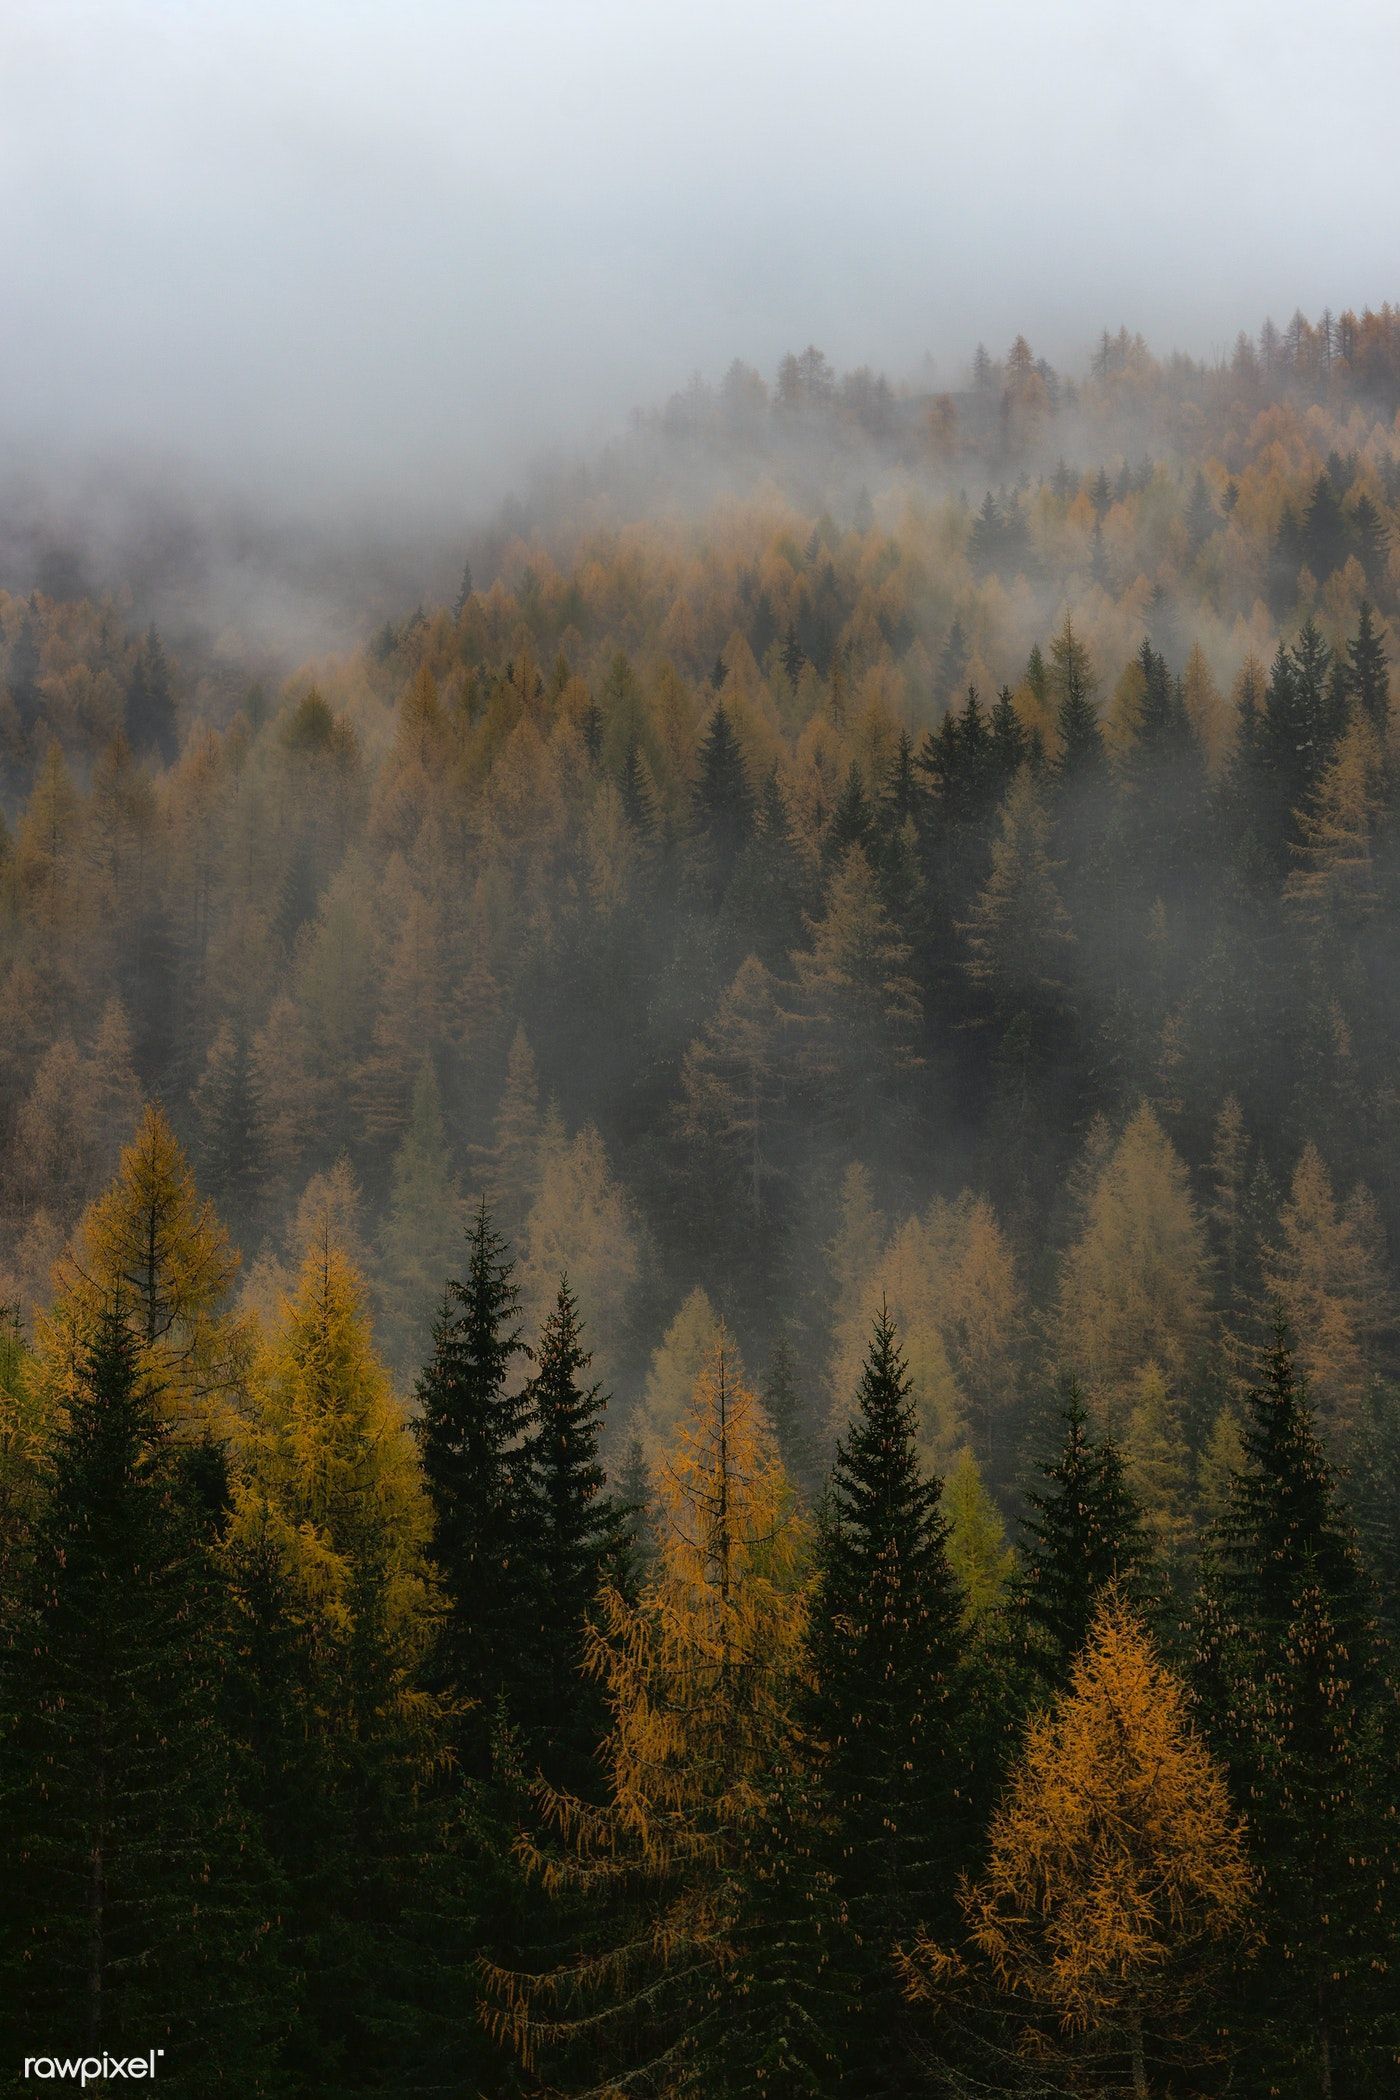 A foggy forest with pine trees - Fog, foggy forest